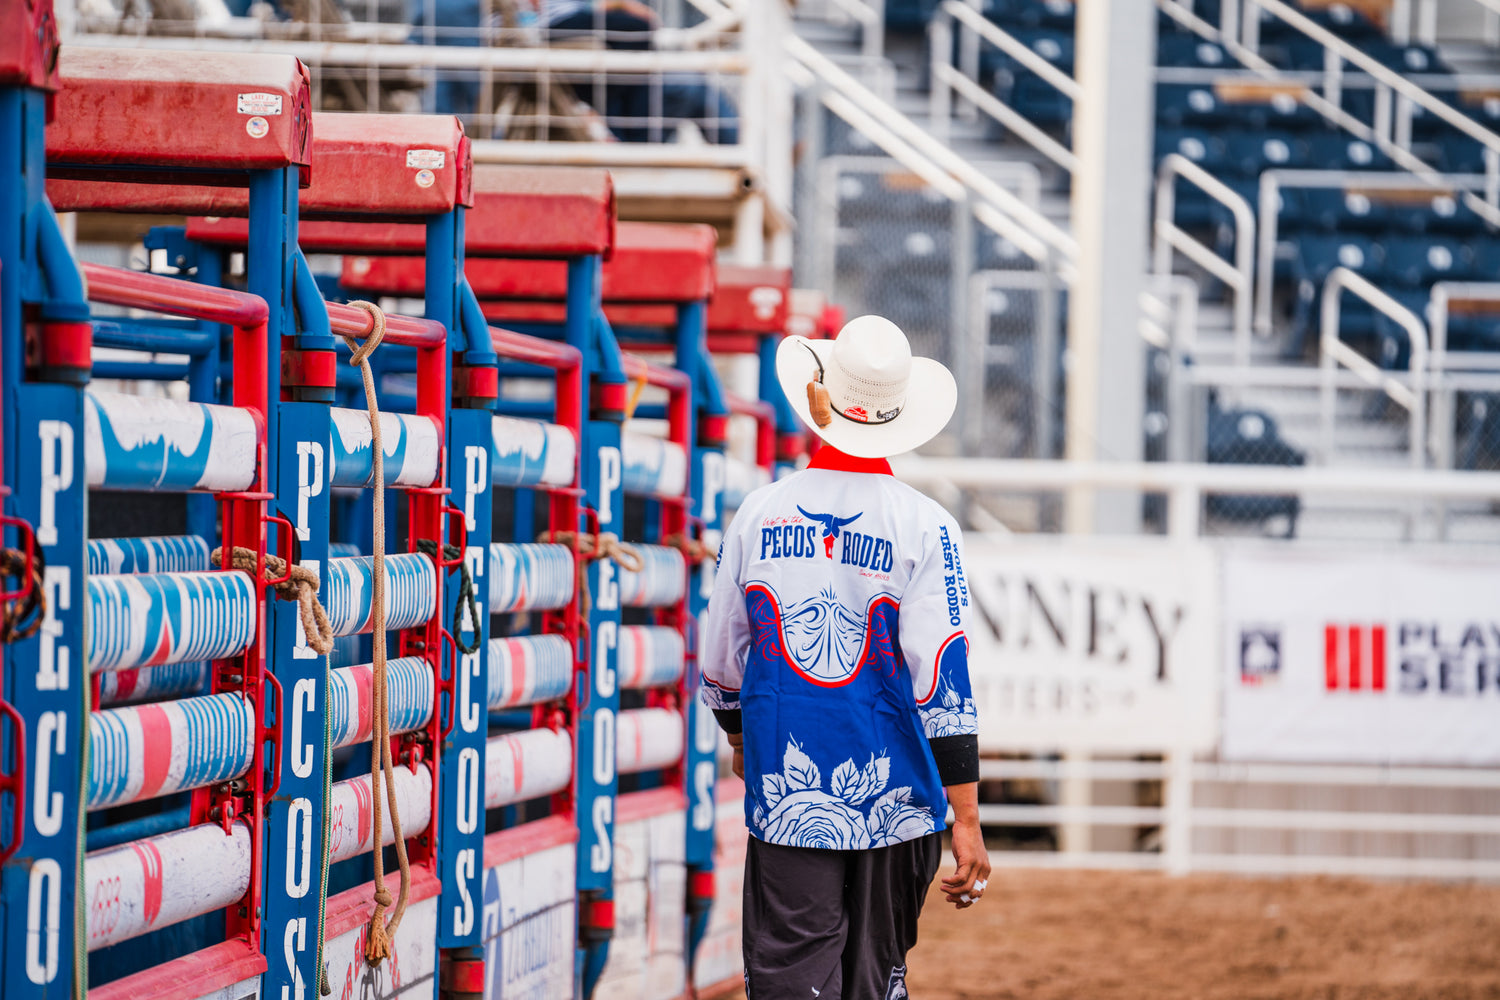 West of The Pecos Rodeo